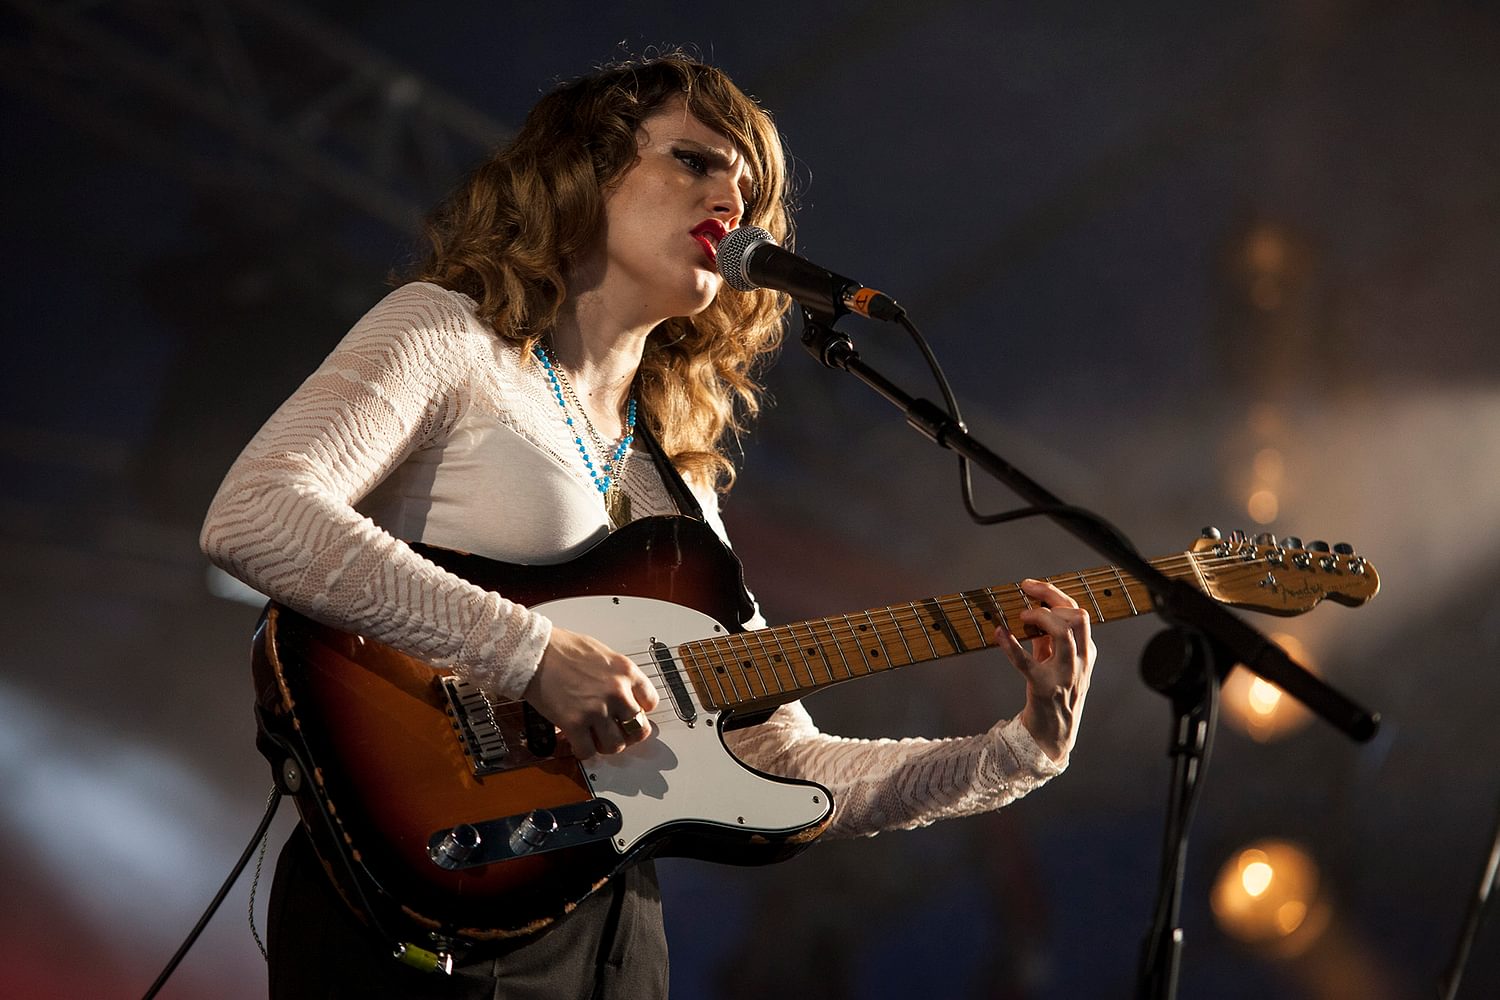 Anna Calvi soaks the stage with red at Latitude 2014